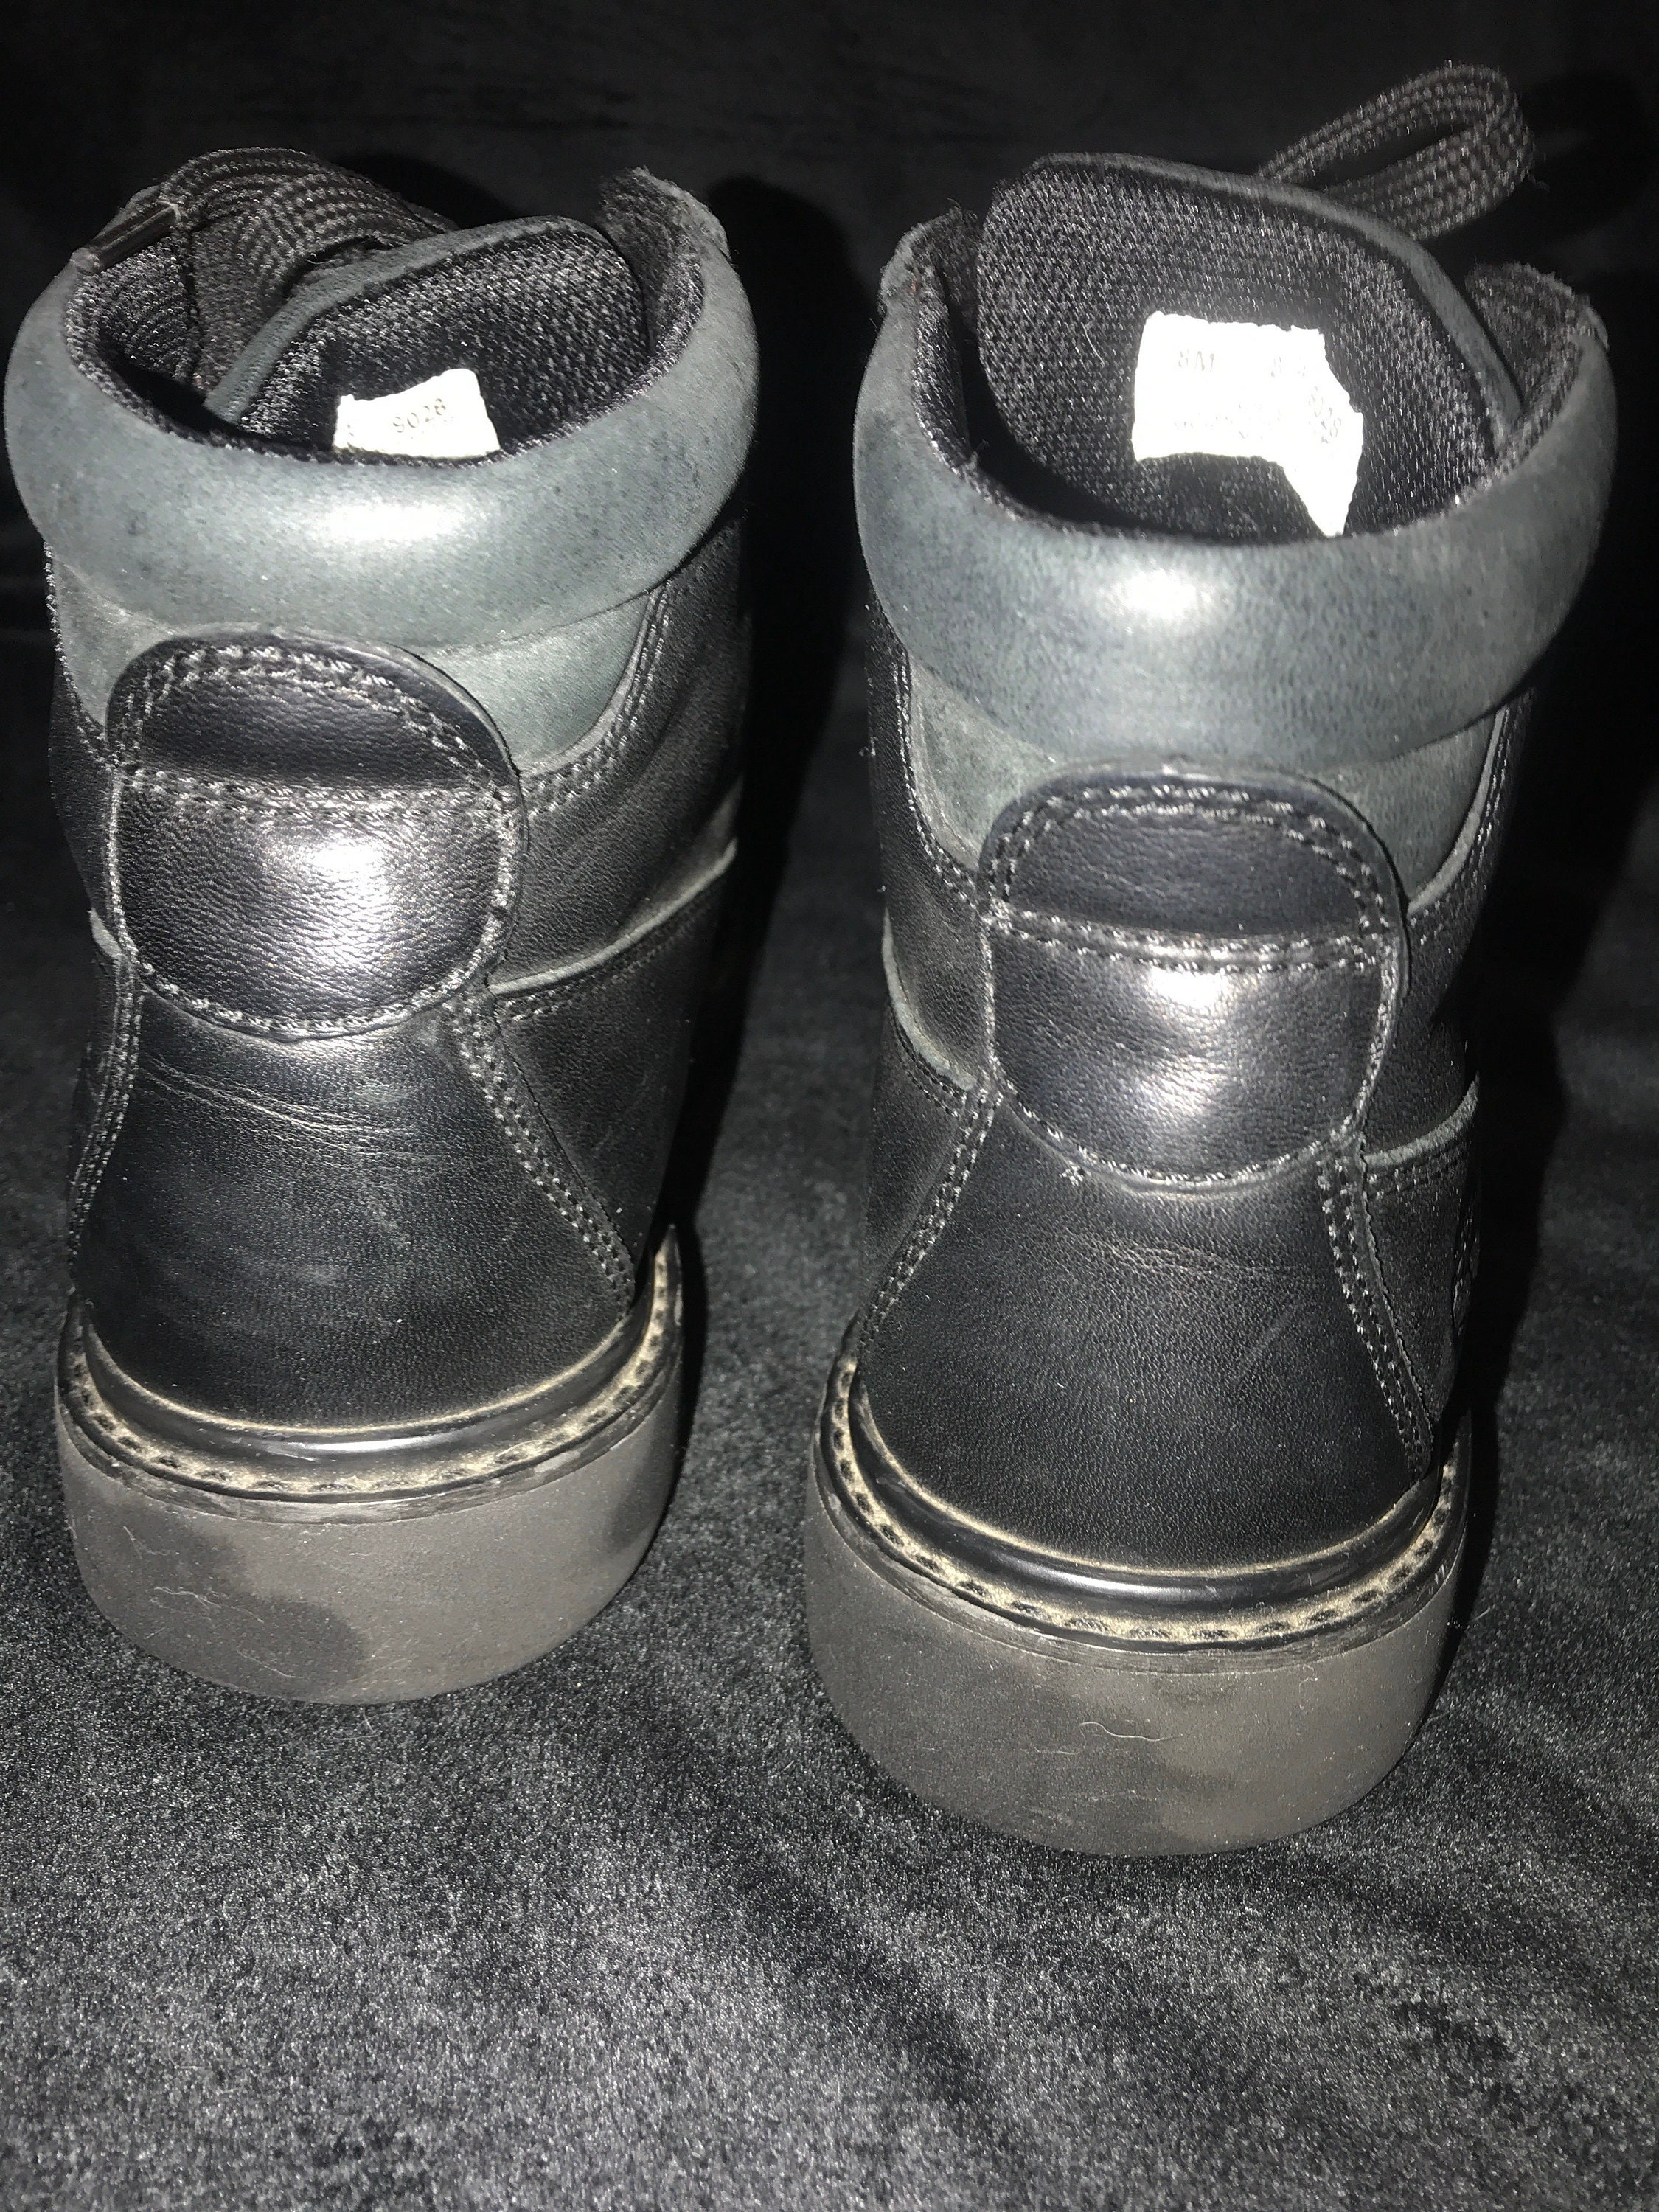 Vintage Black Timberland Boots. Timberland Leather Boots. 90’s Womens ...